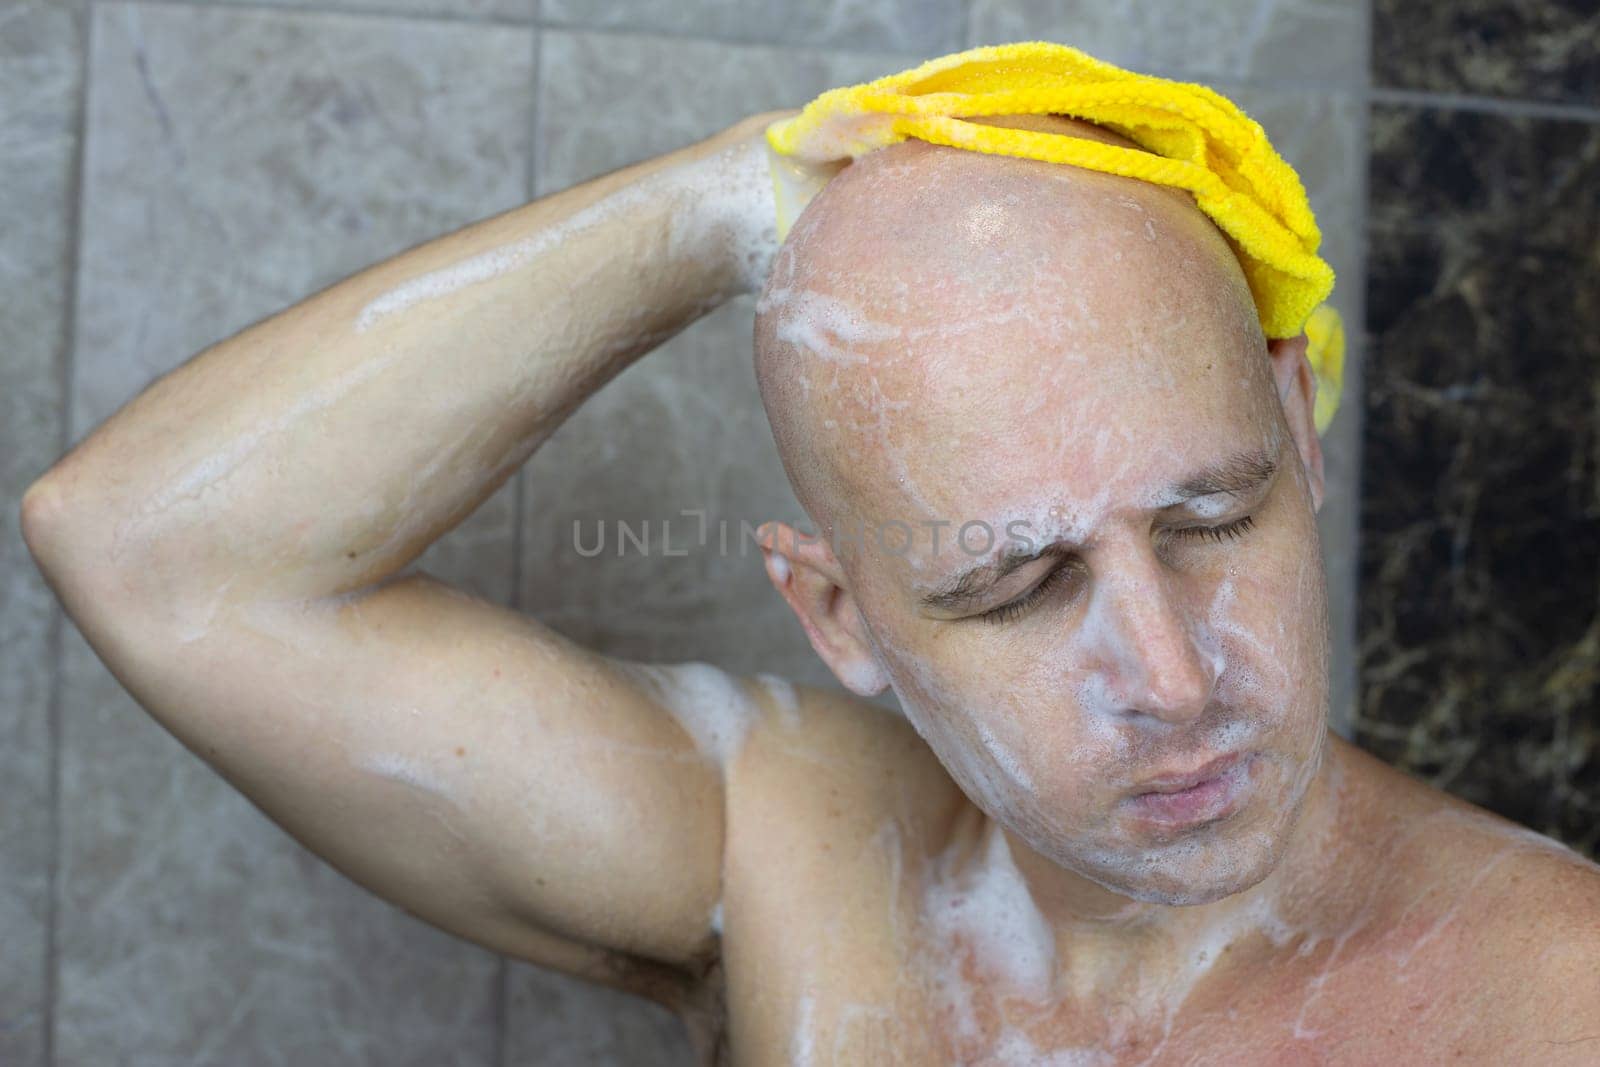 Man washes his bald hairless head with in shower washcloth by timurmalazoniia